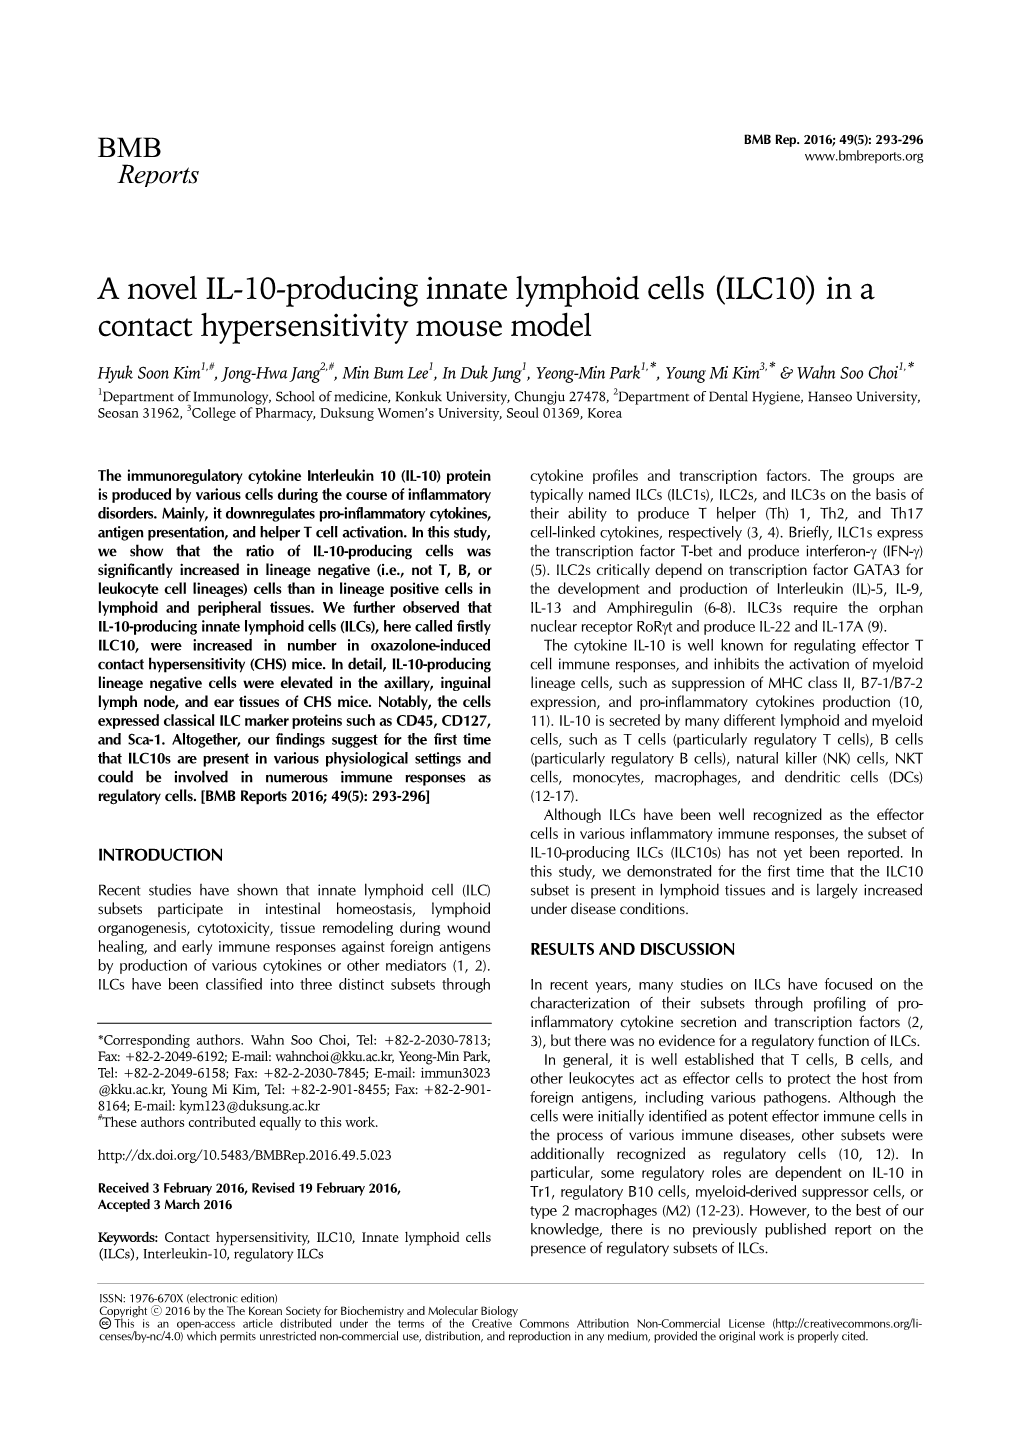 A Novel IL-10-Producing Innate Lymphoid Cells (ILC10) in a Contact Hypersensitivity Mouse Model